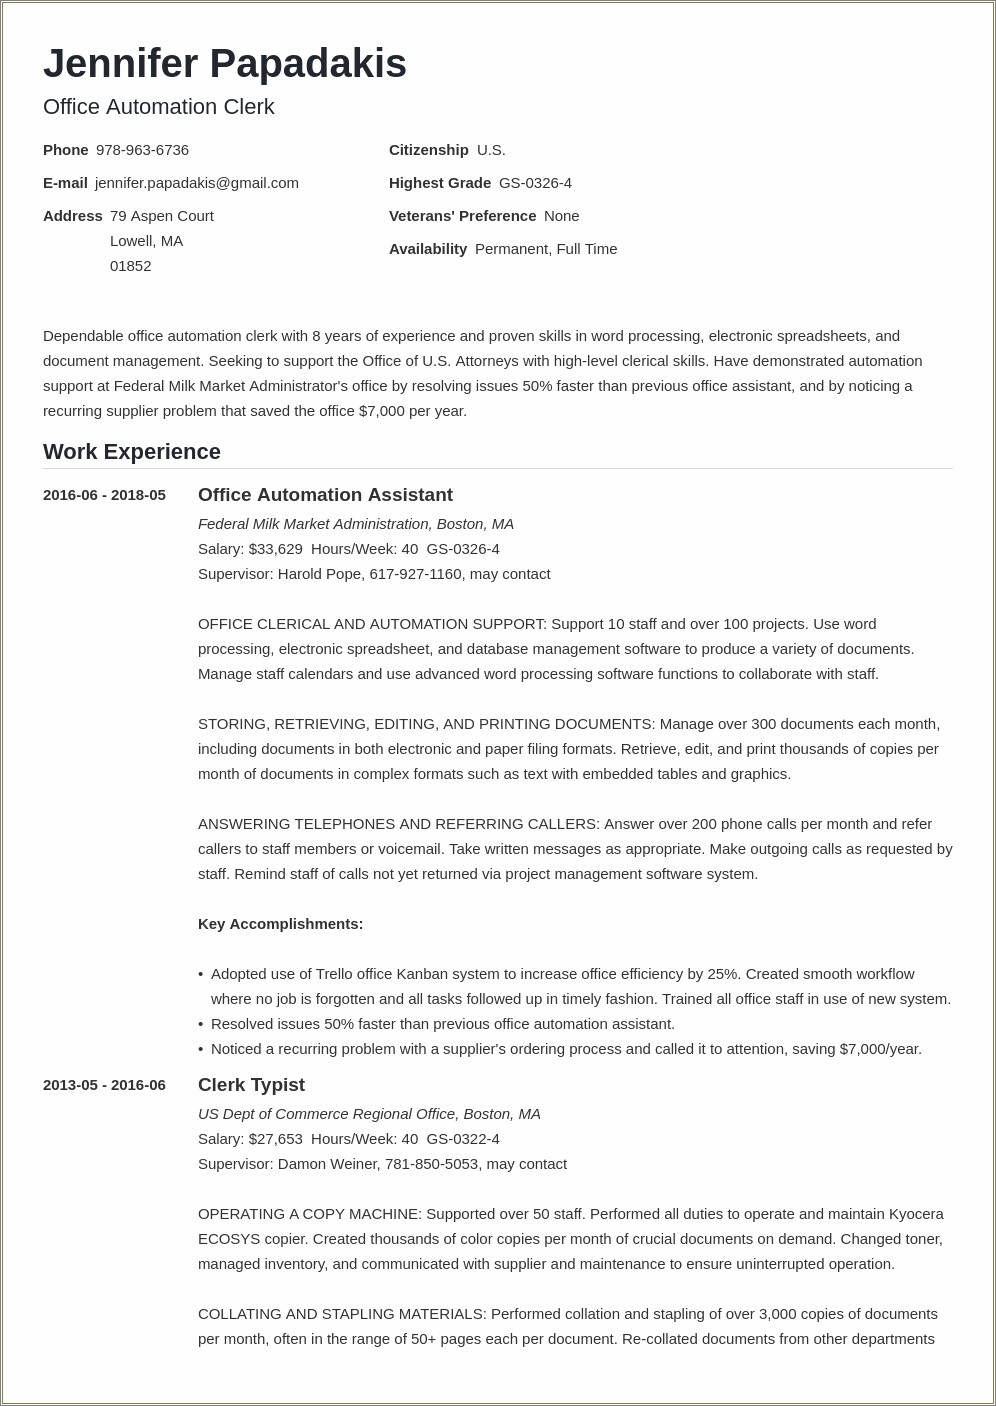 Federal Resume All Jobs Or Only Relevan Ones